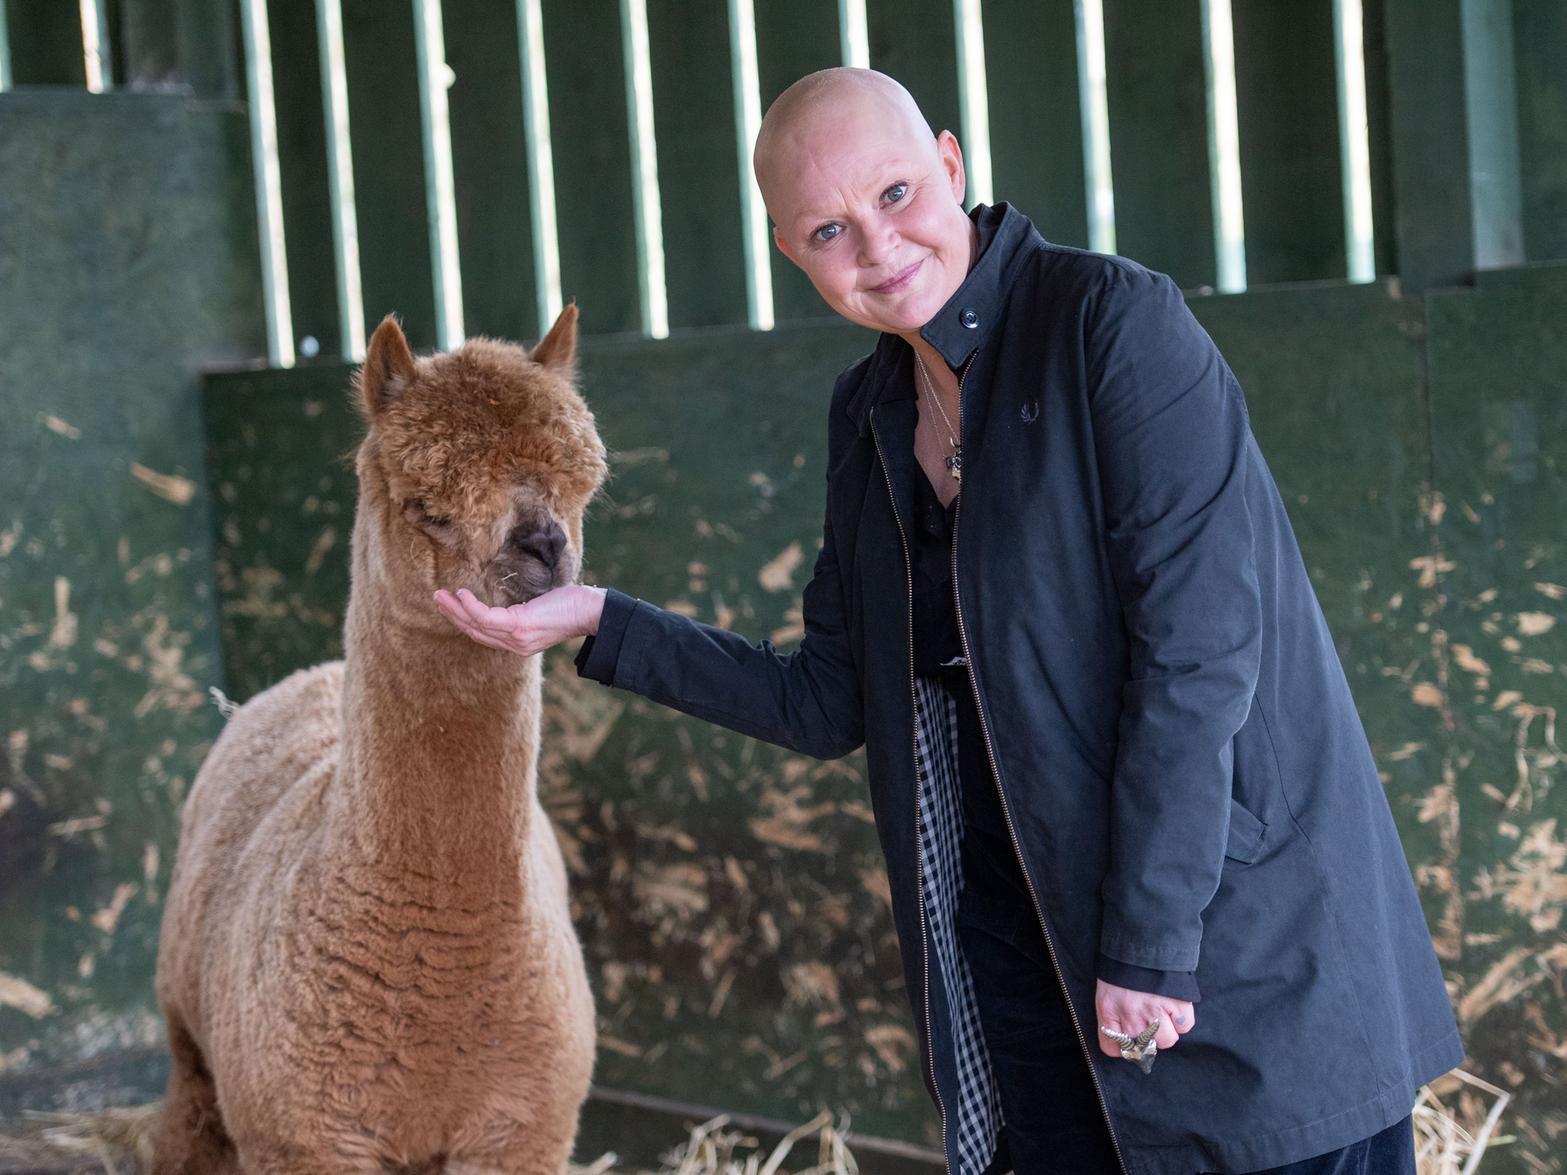 Edinburgh-born Gail Porter meets the new Love Gorgie Farm team and helps out with volunteers to get the farm ready for opening later this month. Pic: Ian Georgeson